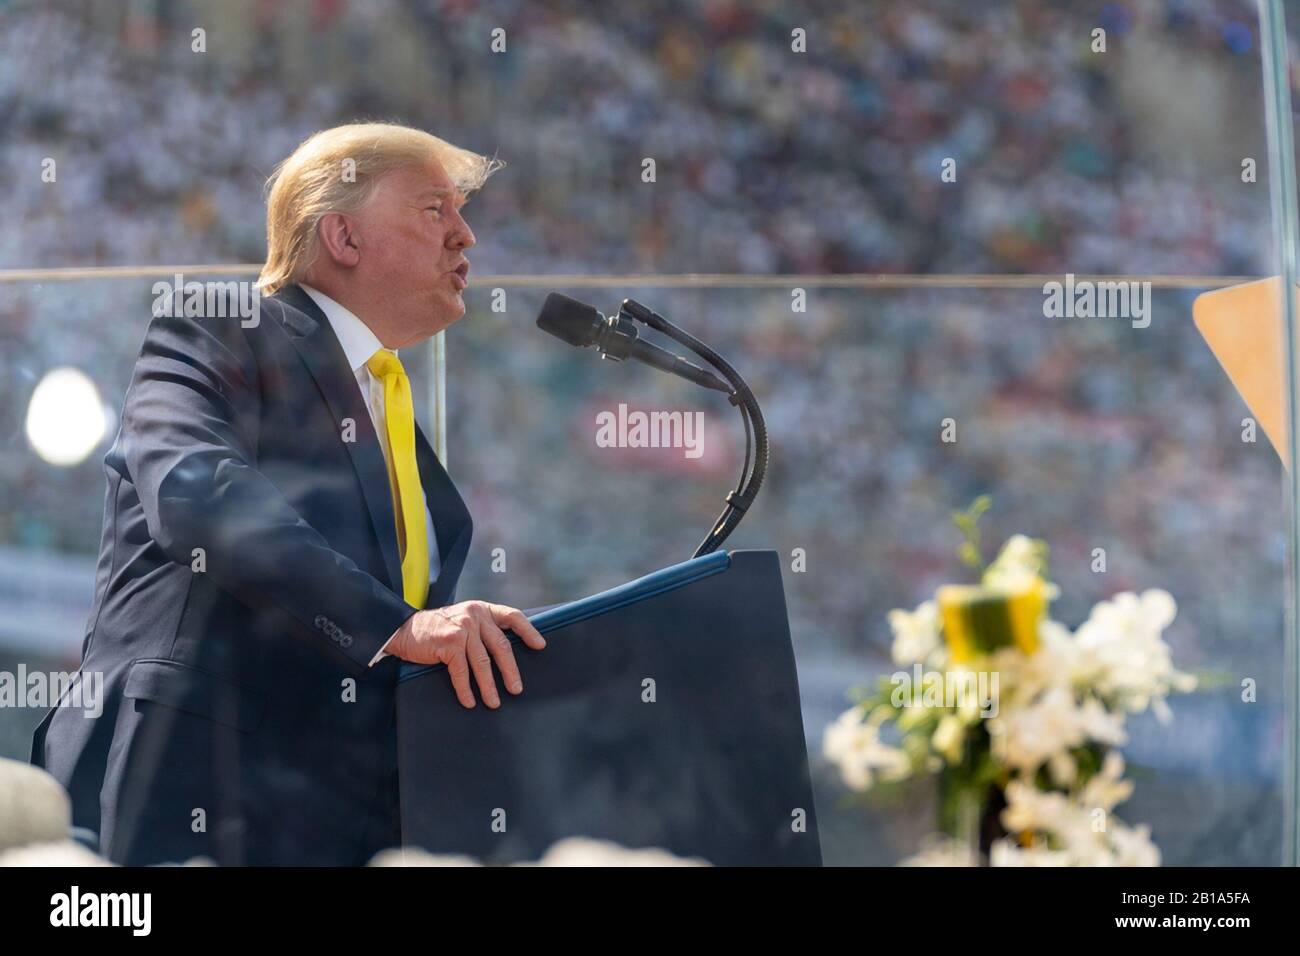 Ahmedabad, India. 24th Feb, 2020. U.S. President Donald Trump delivers remarks remarks at the Namaste Trump Rally held by Indian Prime Minister Narendra Modi at the Motera Stadium February 24, 2020 in Ahmedabad, Gujarat, India. Credit: Shealah Craighead/White House Photo/Alamy Live News Stock Photo